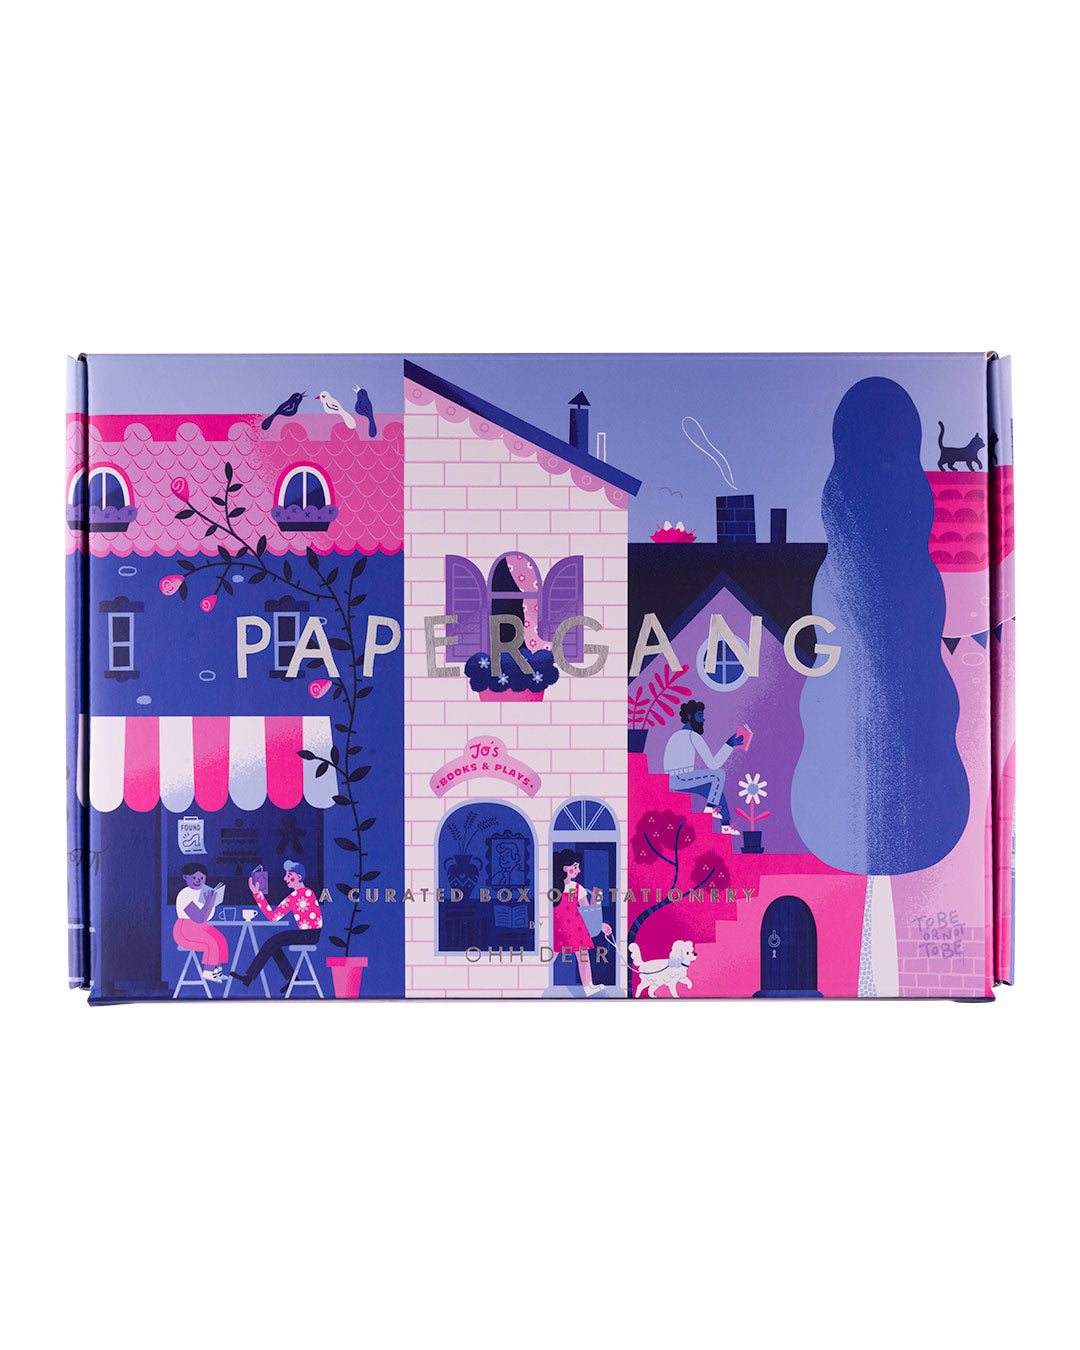 Papergang ’Book Street’ Stationery Box